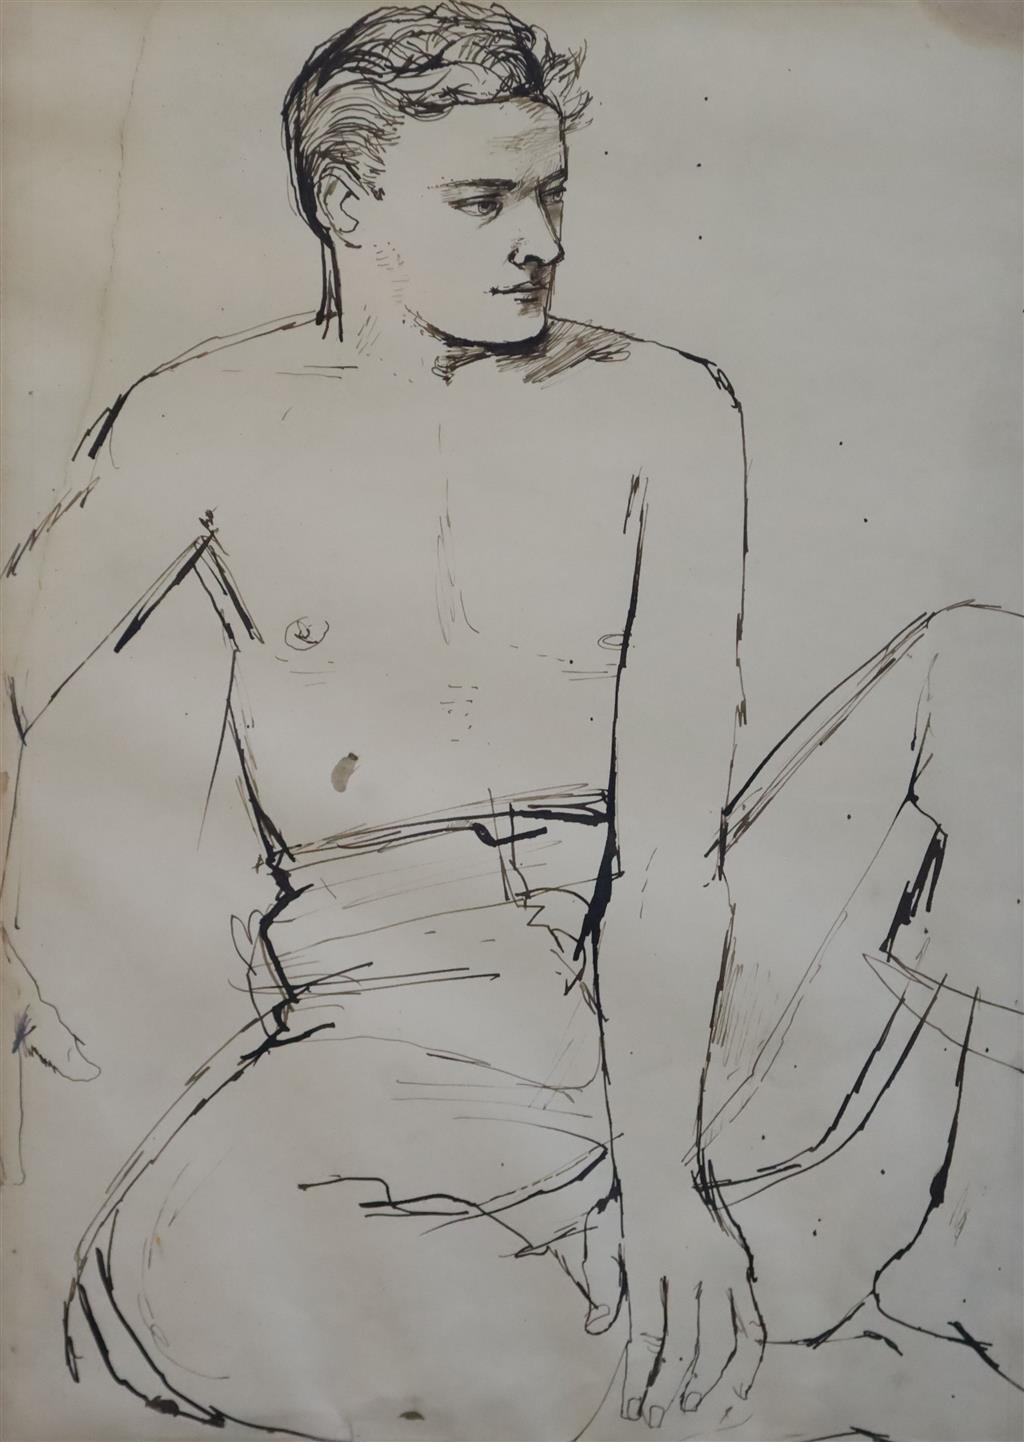 § John Minton (1917-1957) Two studies of a young man seated shirtless and with one arm folded 15 x 10.75in. and 14.75 x 10.25in.